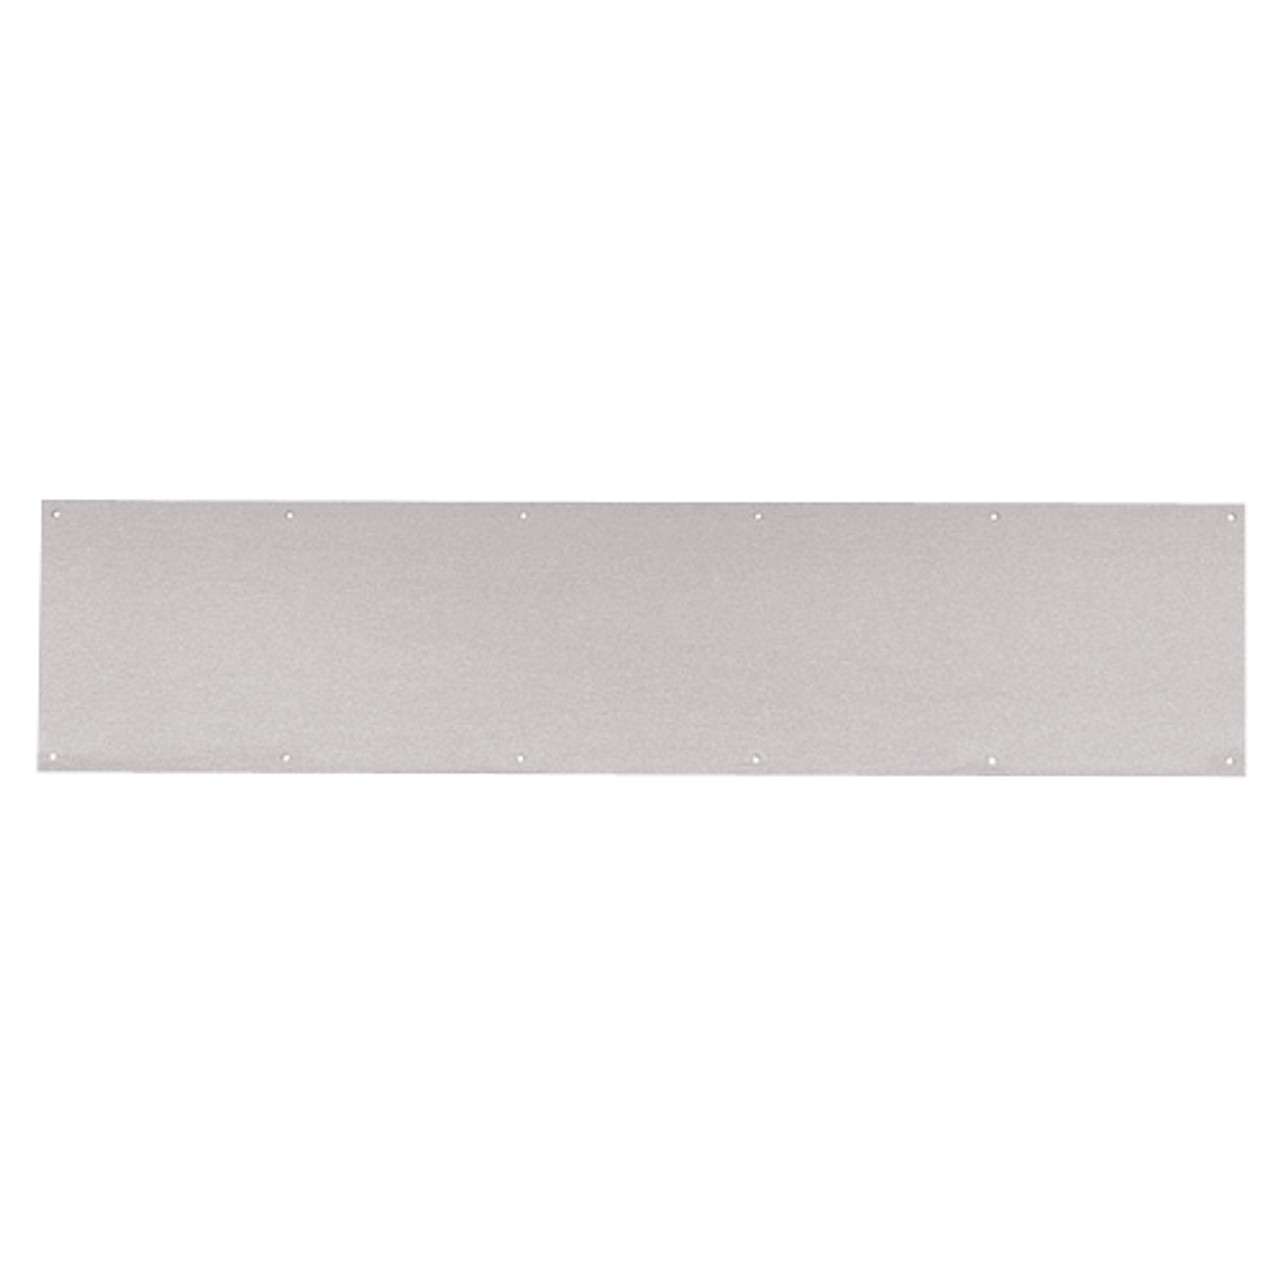 8400-US32D-33x34-B-CS Ives 8400 Series Protection Plate in Satin Stainless Steel